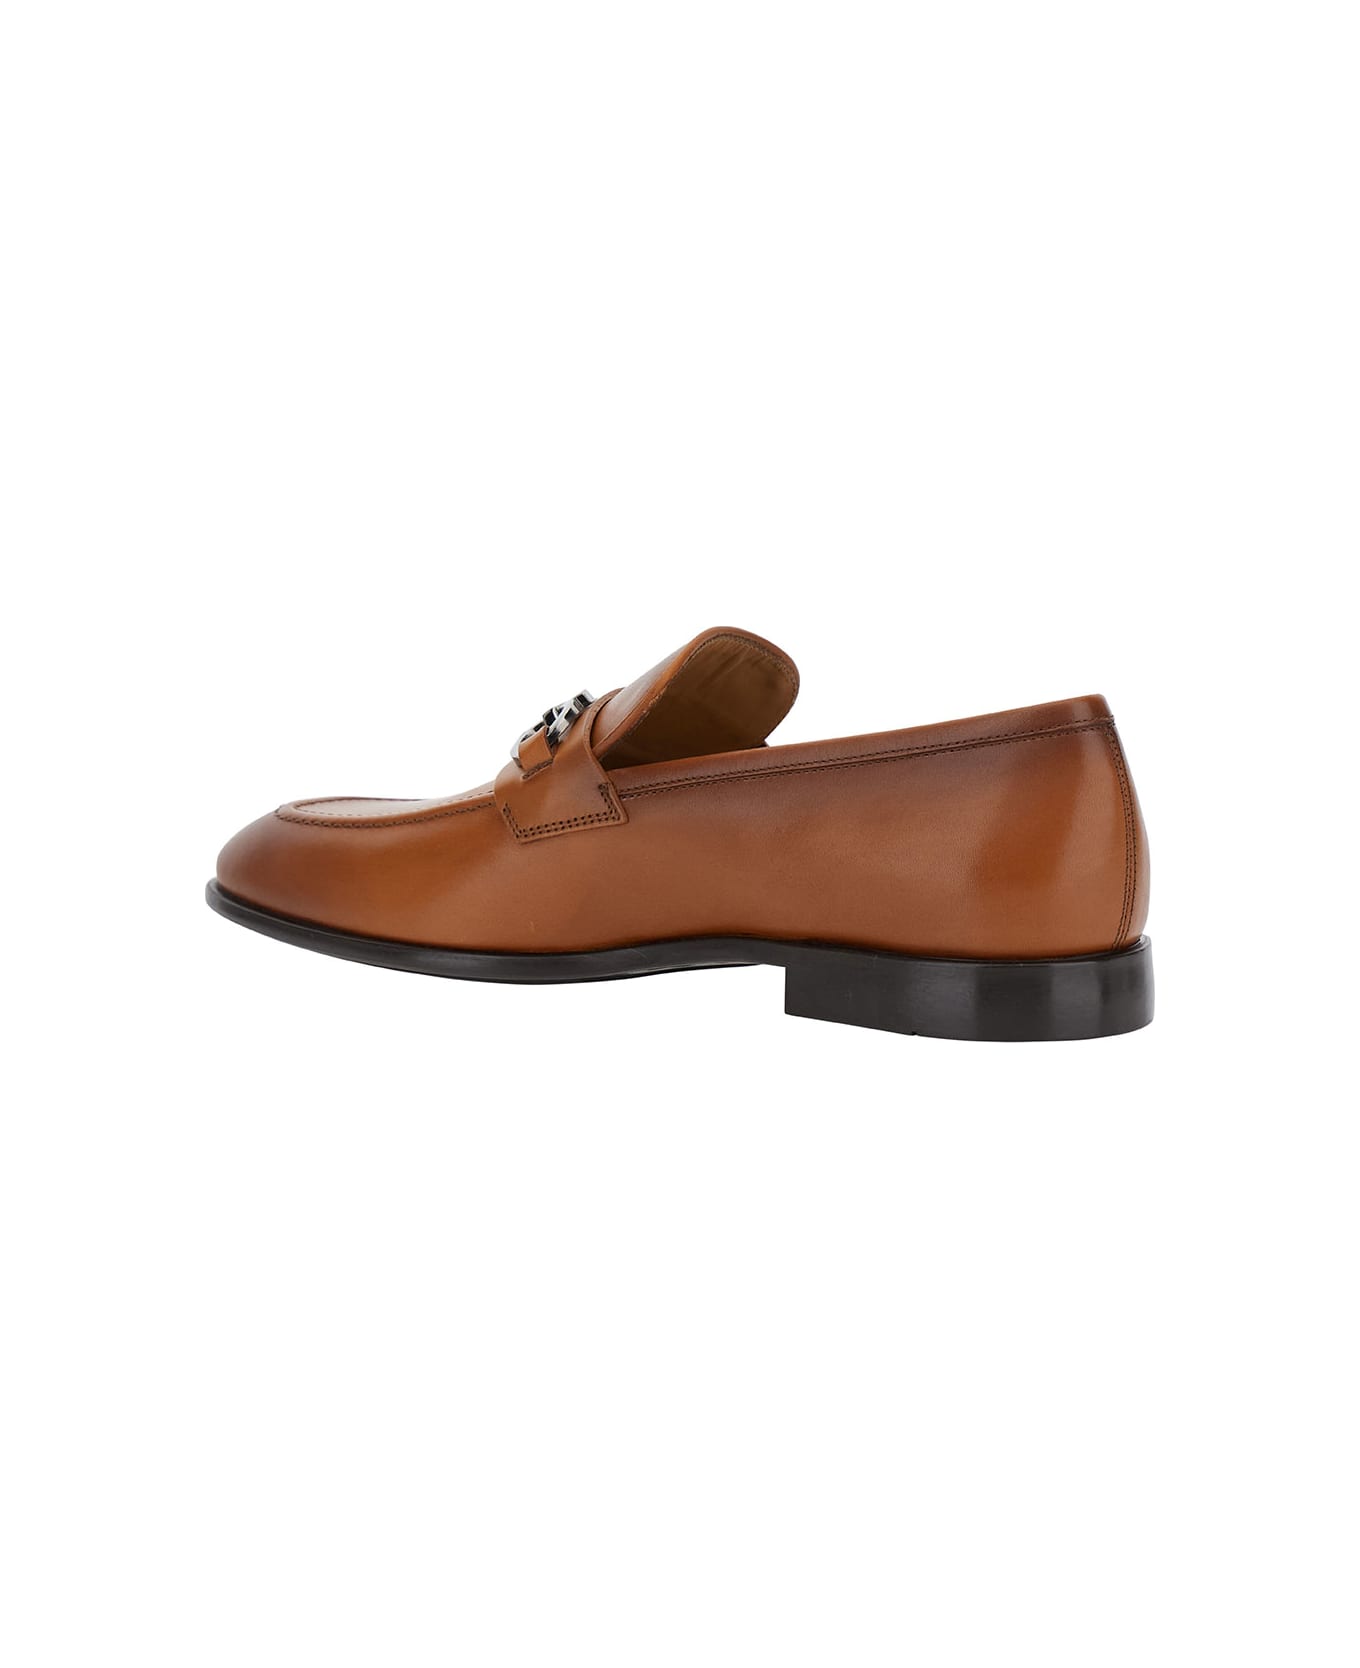 Ferragamo Brown Loafers With Gancini Detail In Leather Man - Beige